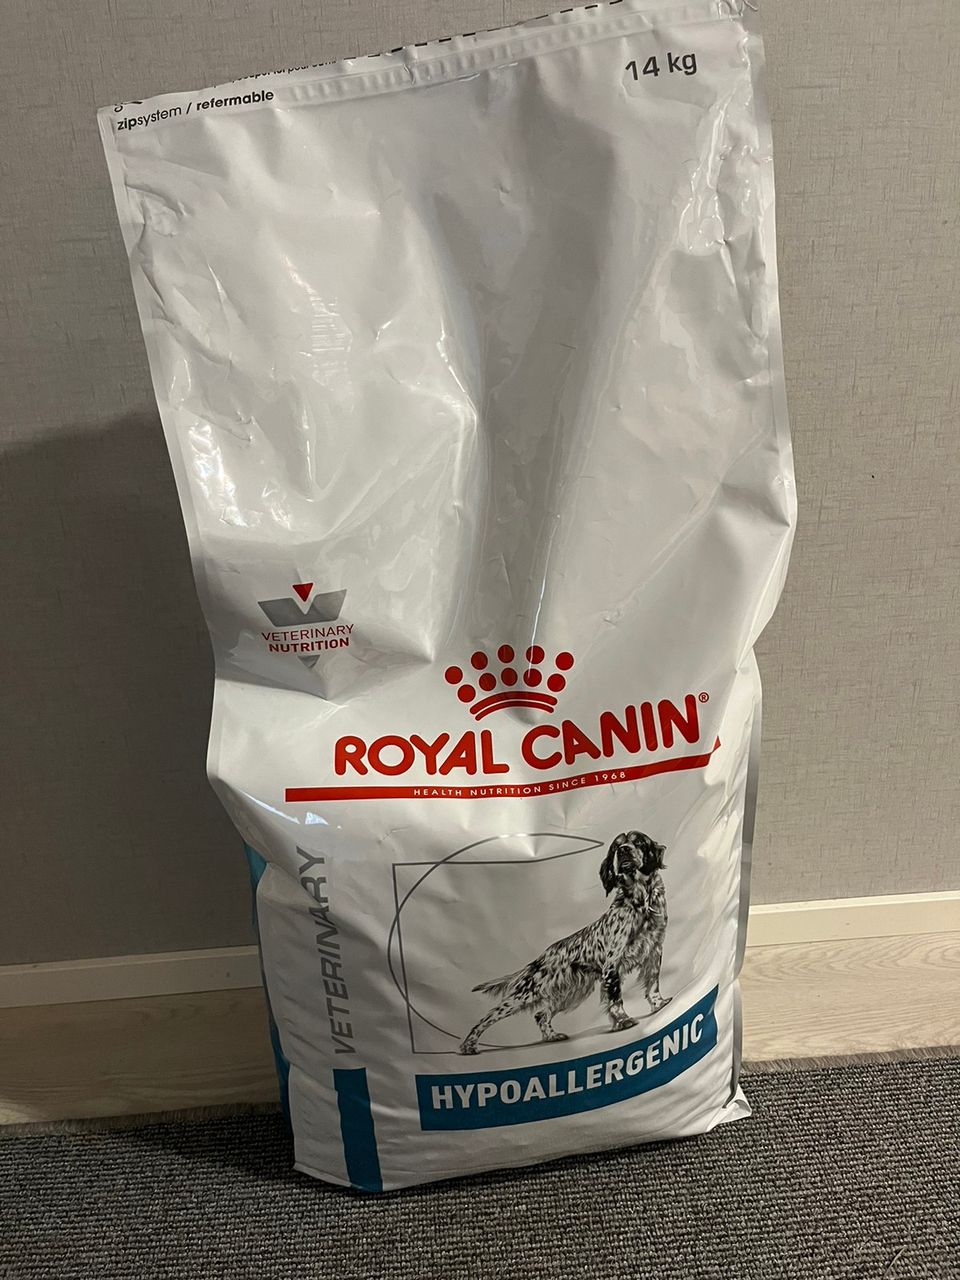 Royal canin hypoallergenic